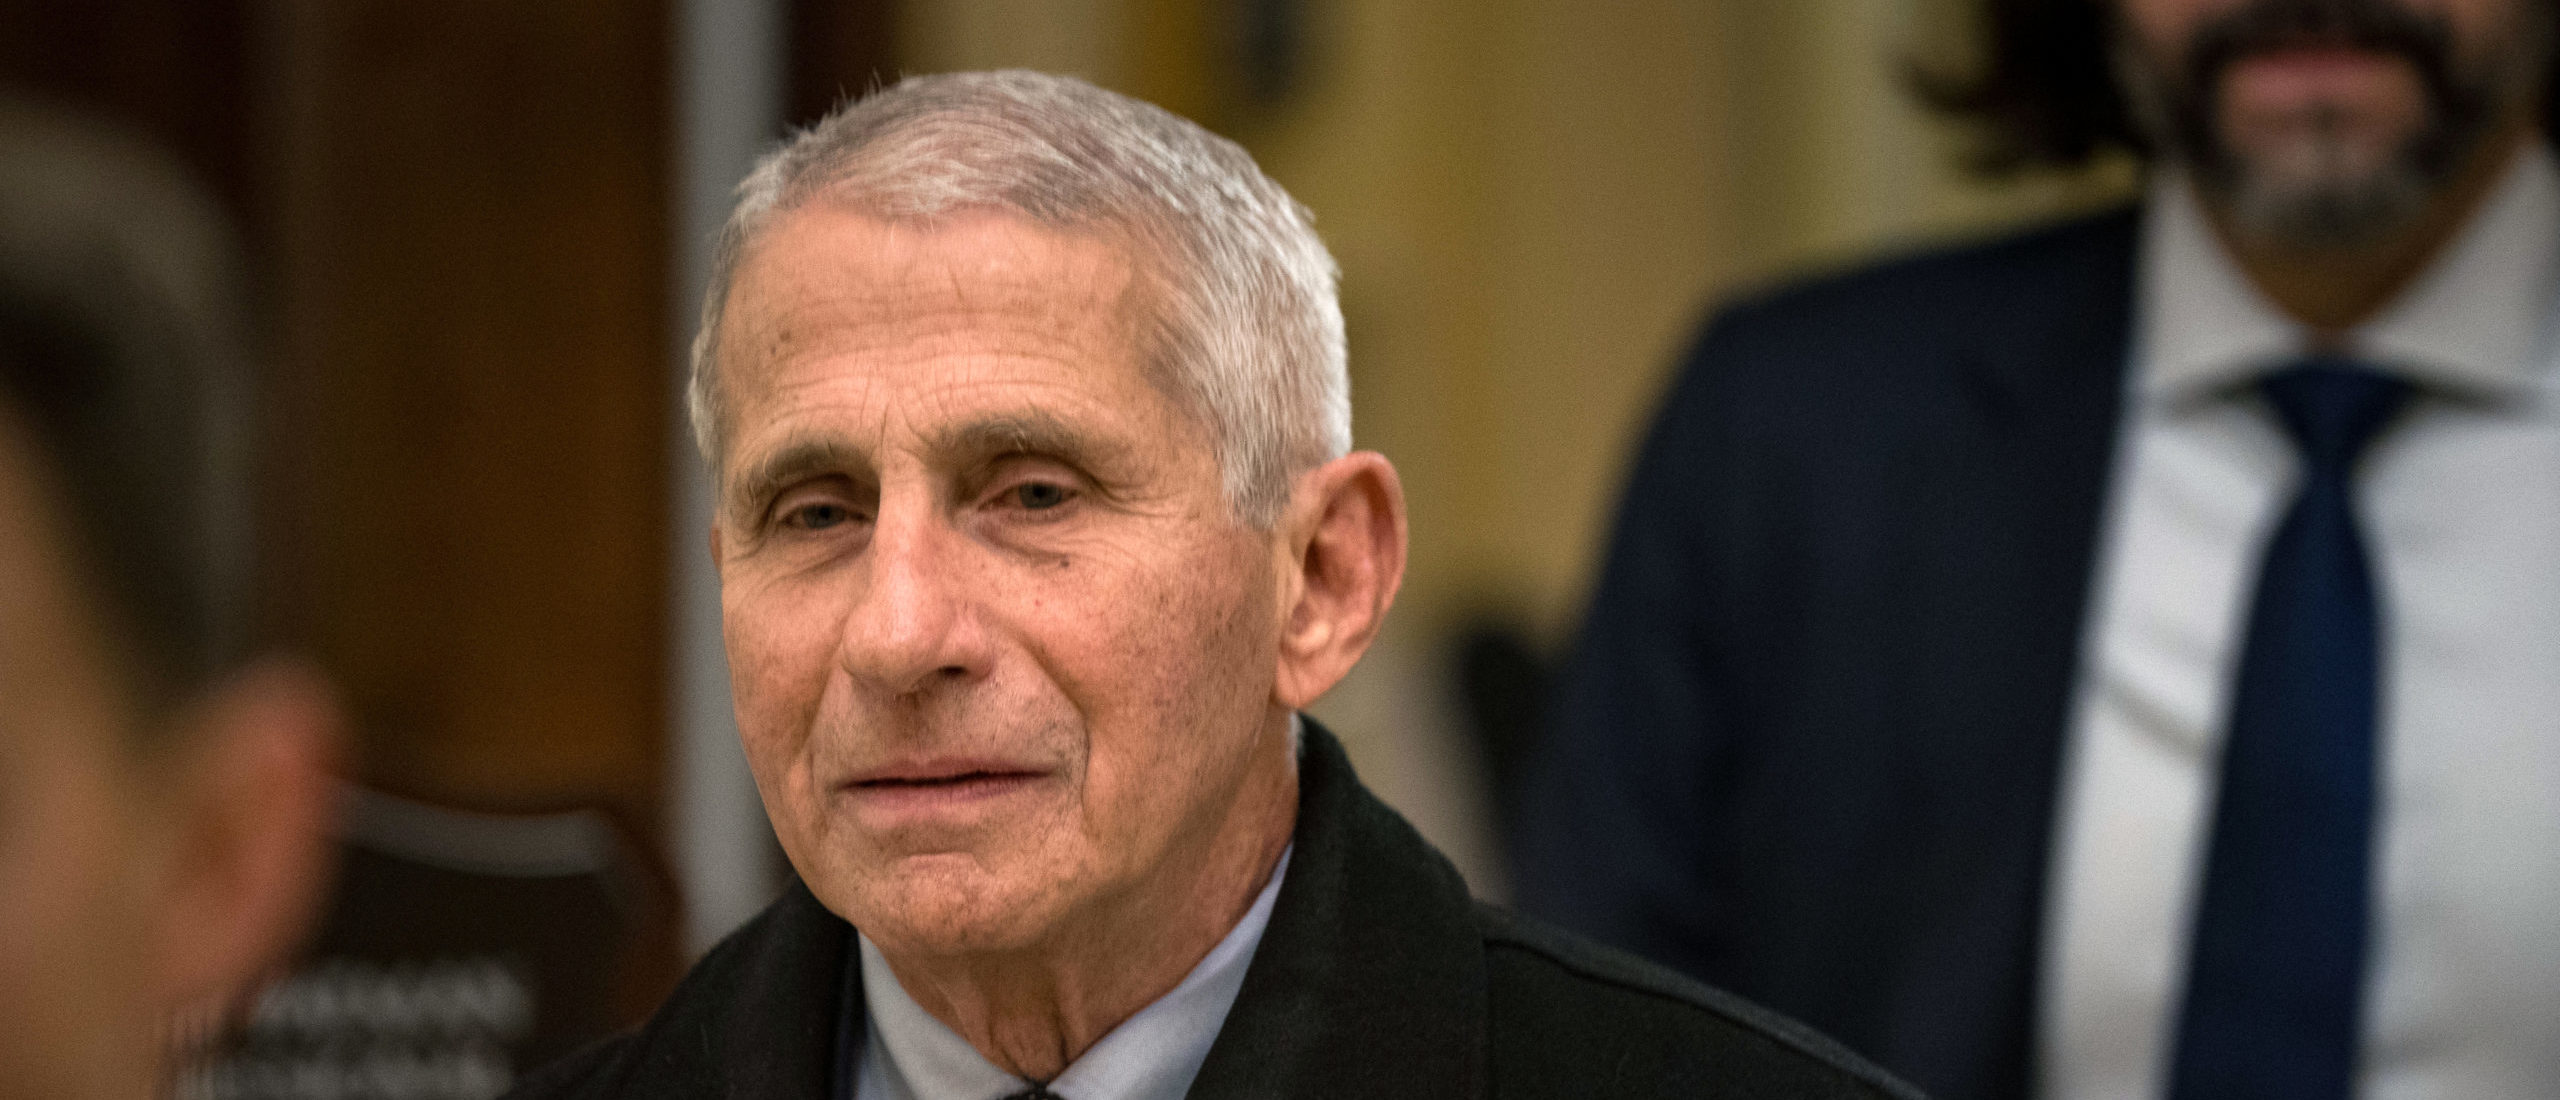 Dr. Fauci To Testify Publicly For First Time Since Retirement